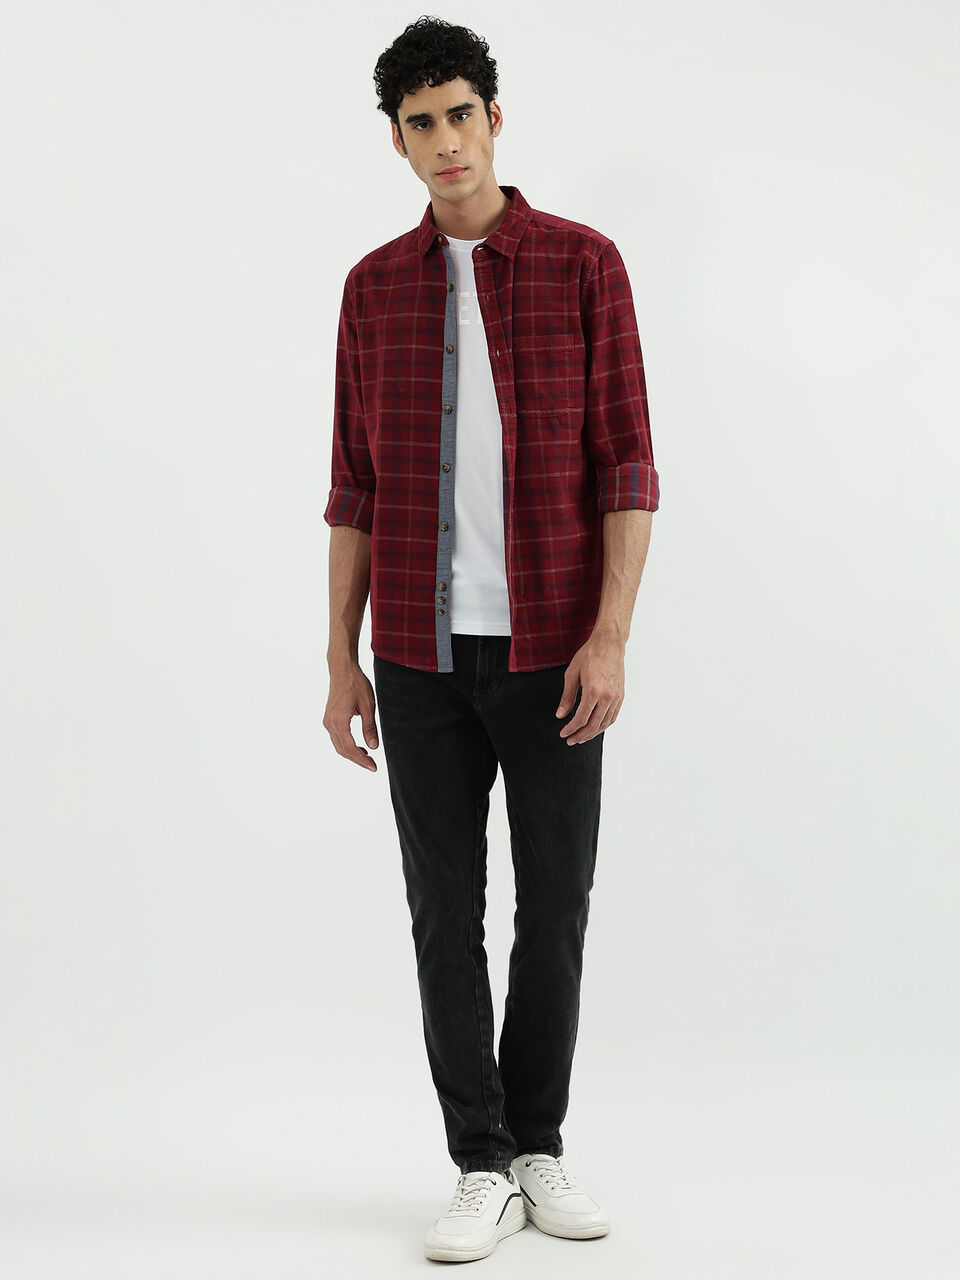 Onward Reserve Button Shirt Men's M Red Check Tailored Fit Non-Iron